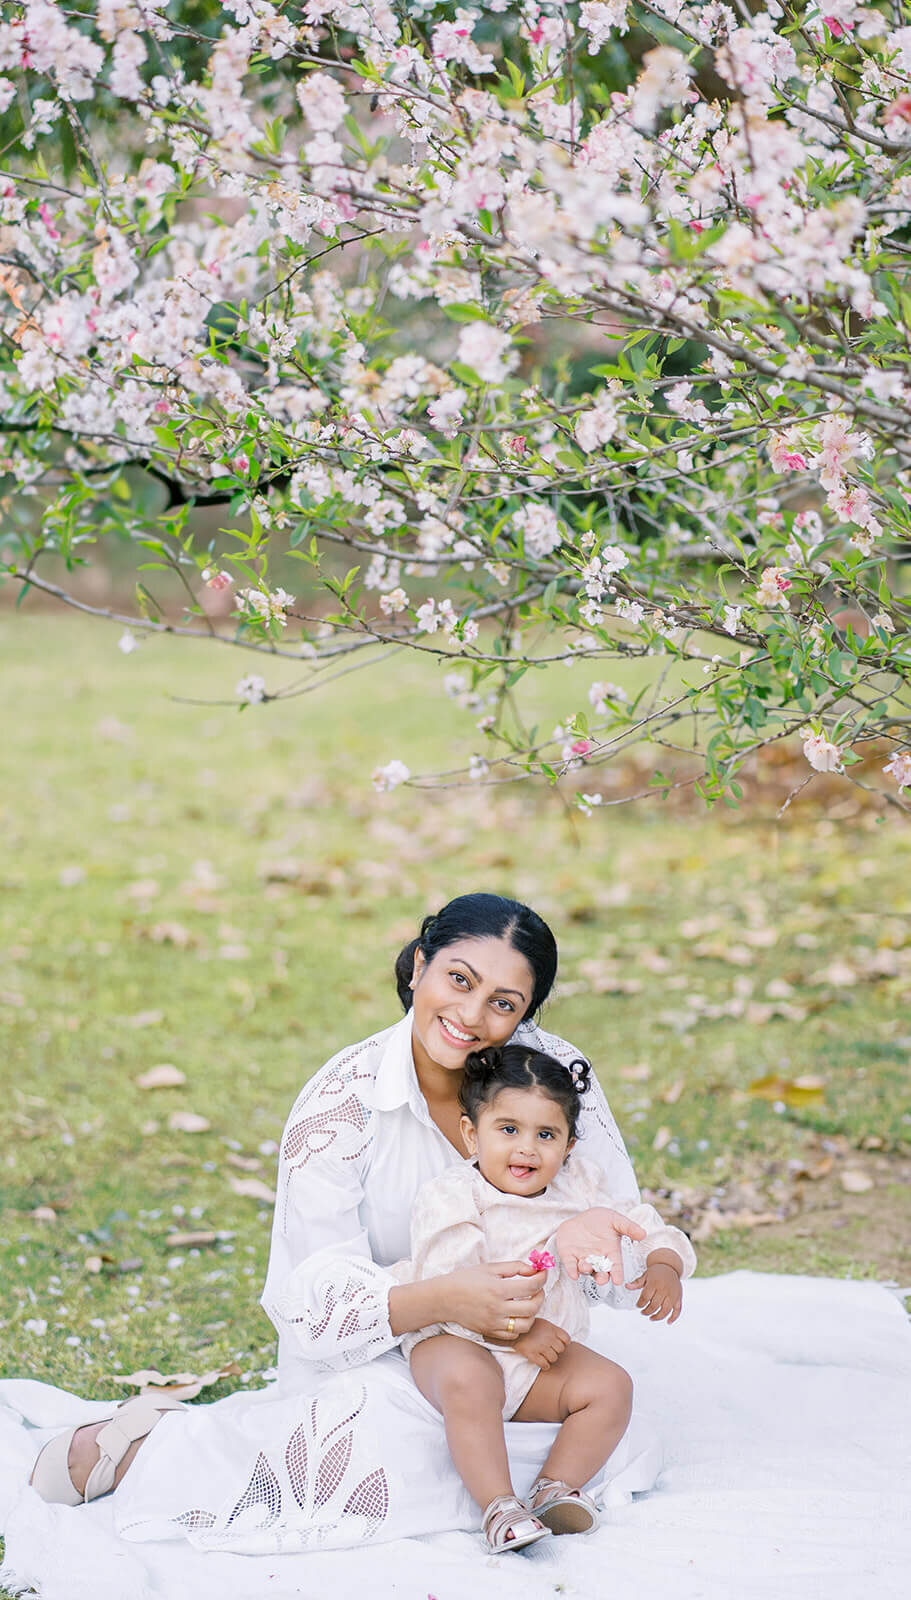 Indian family celebrates their baby's one year birthday amidst stunning cherry blossoms in Gold Coast